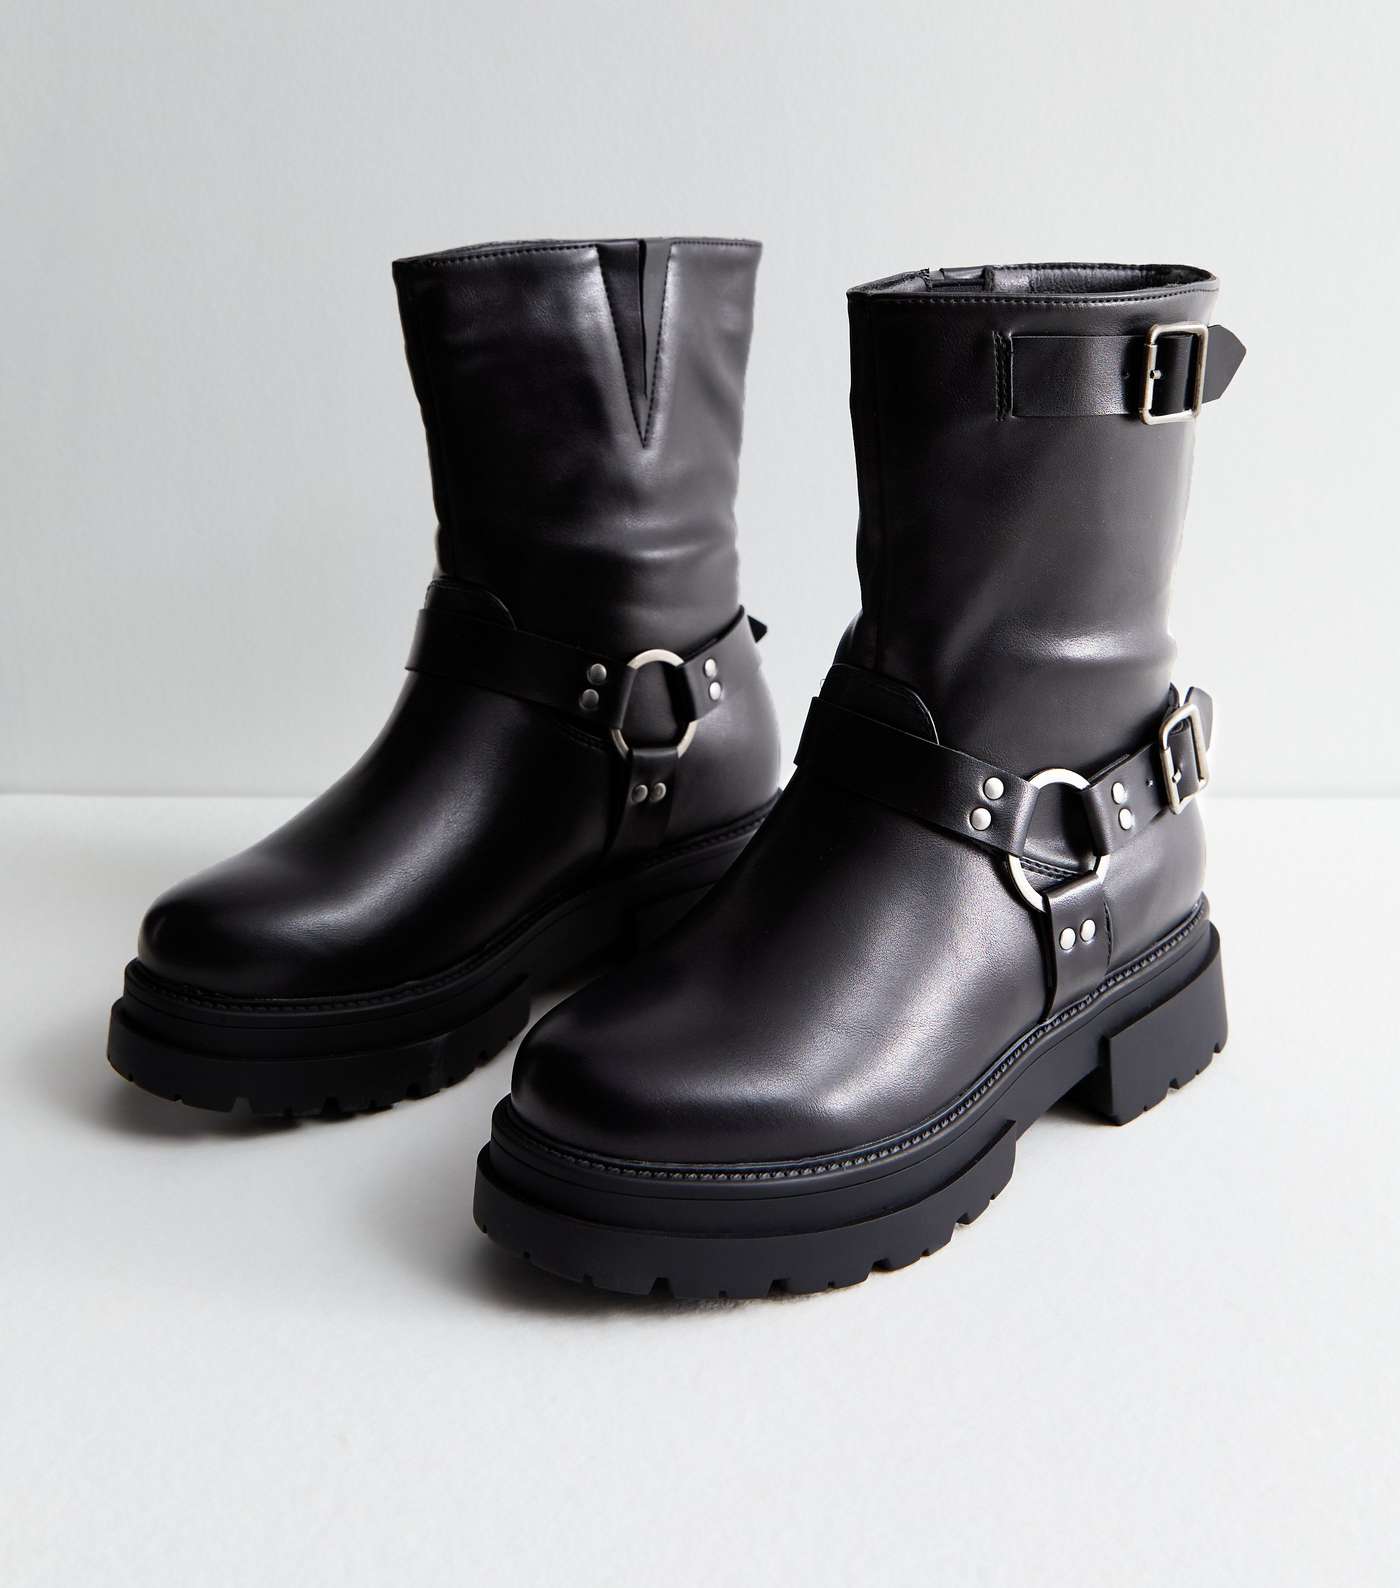 Black Leather-Look Buckle Ankle Biker Boots Image 3